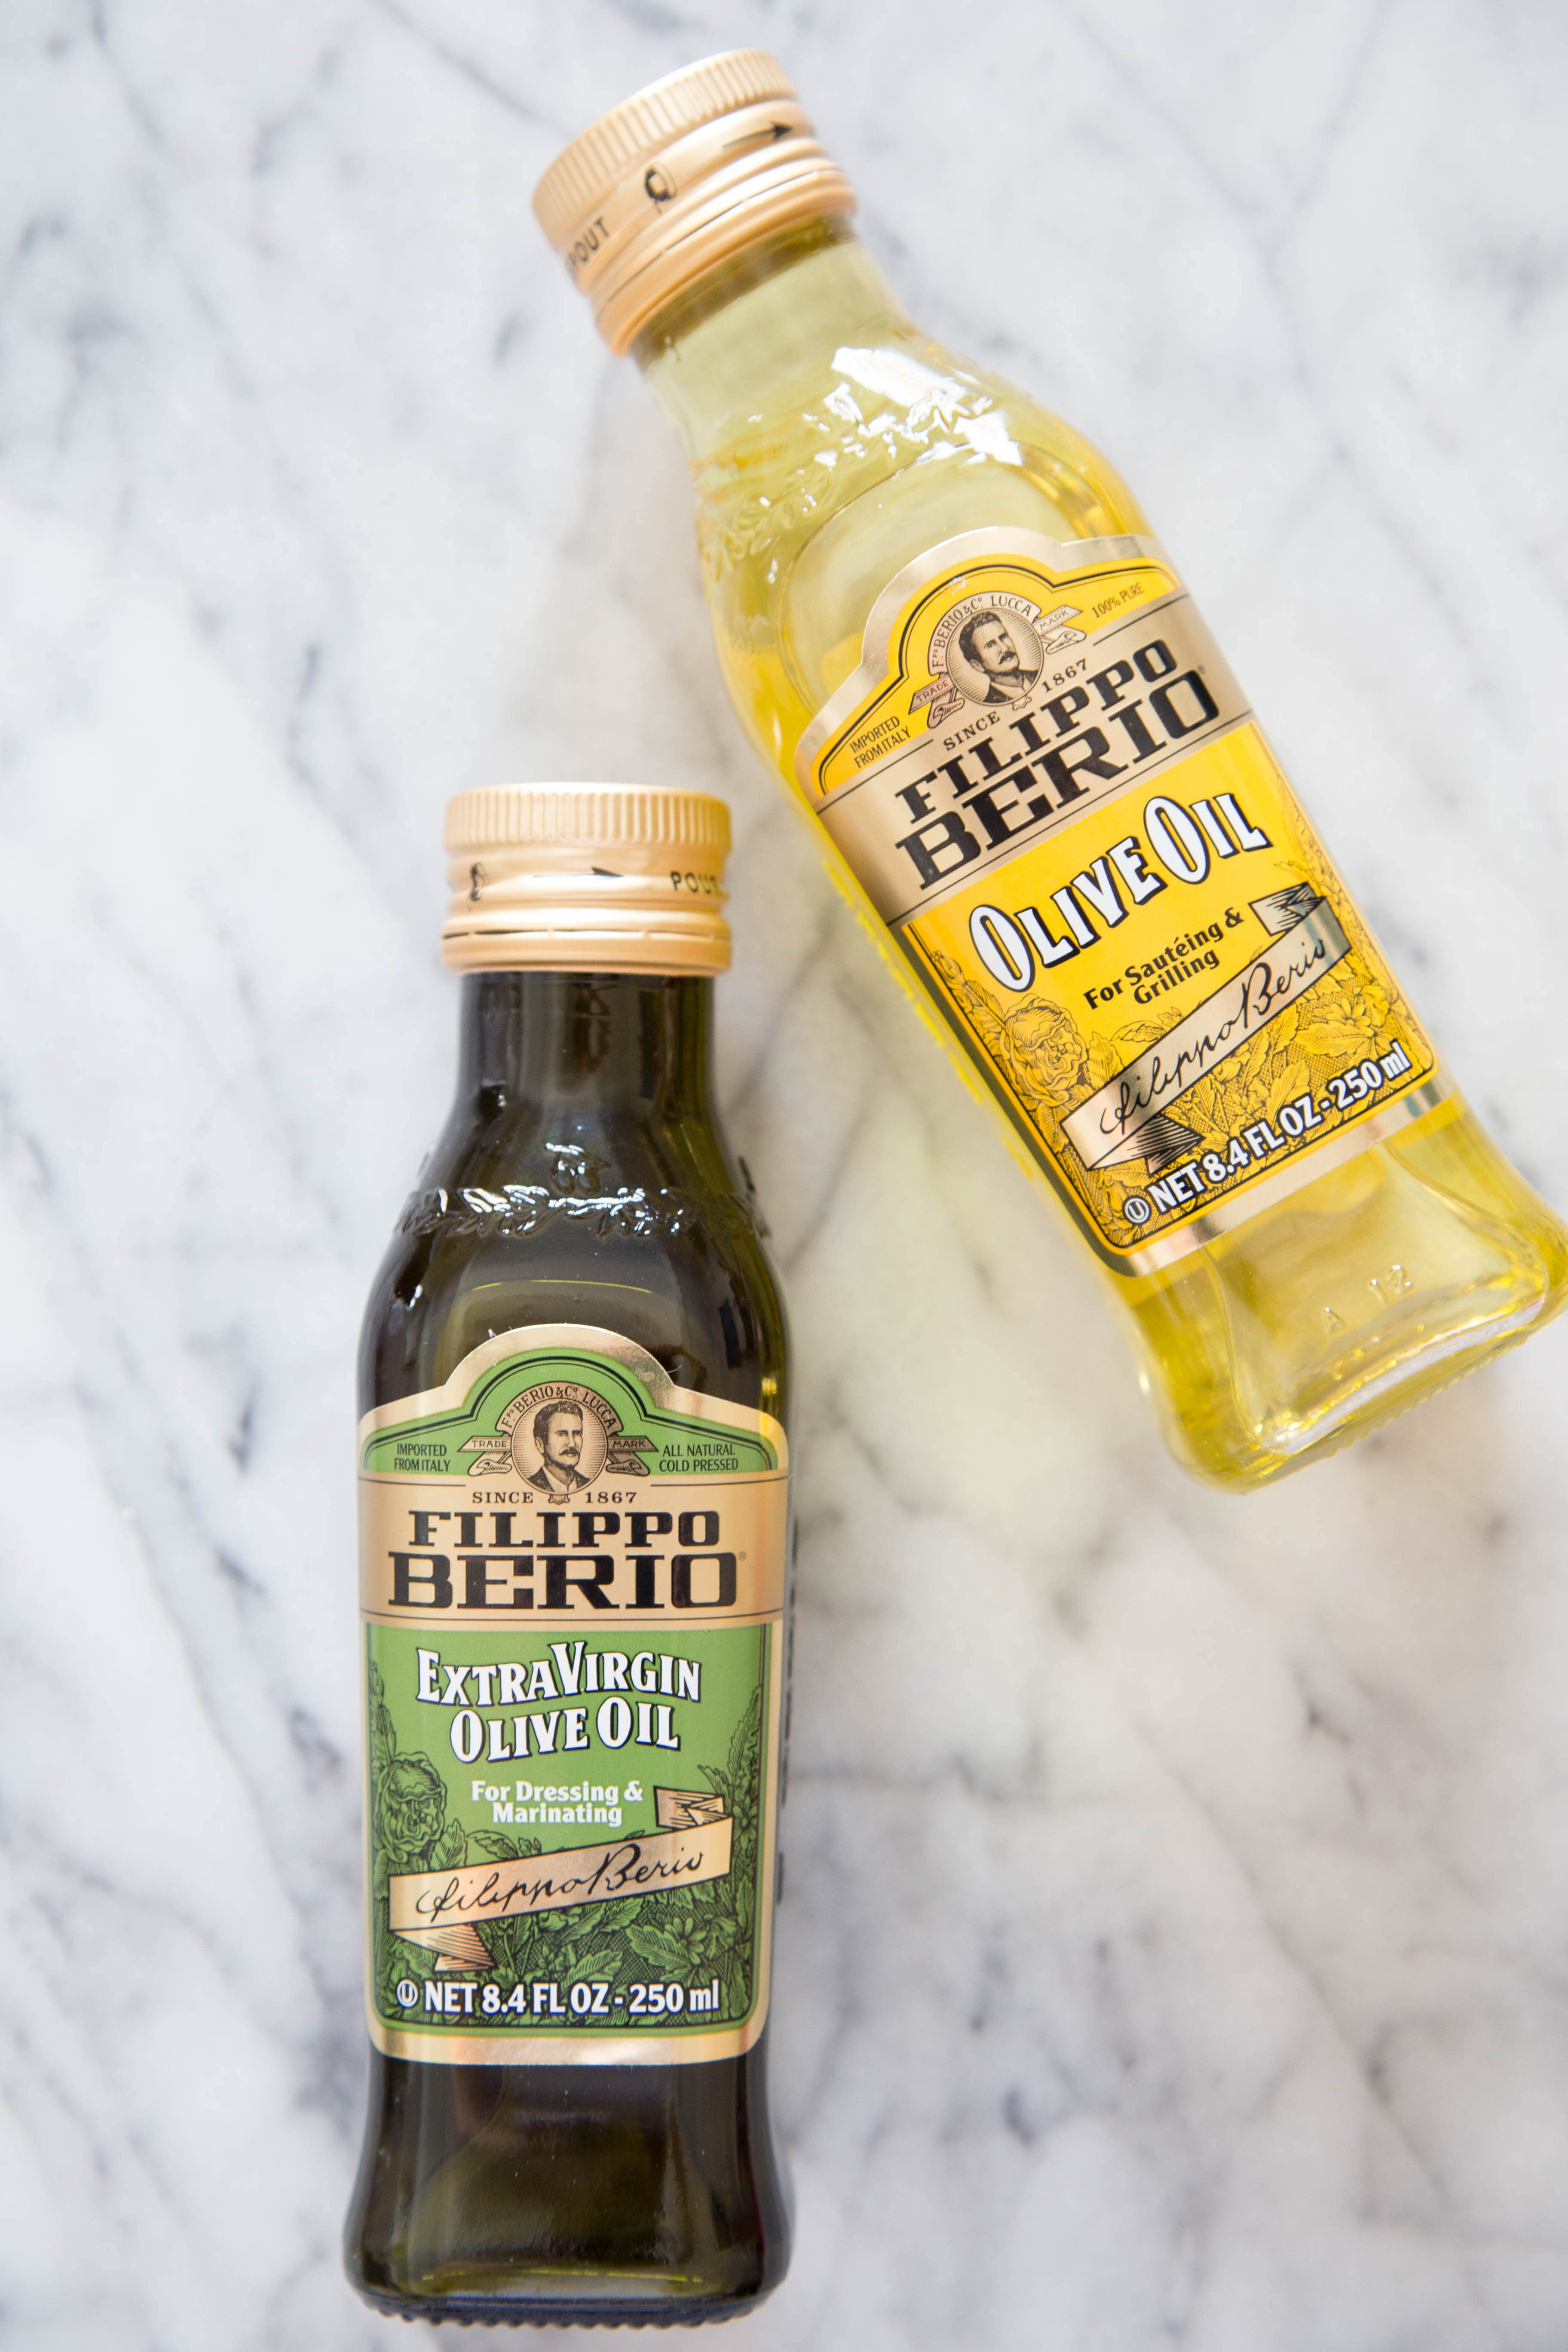 Regular vs. Extra Virgin Olive Oil: What's the Difference?